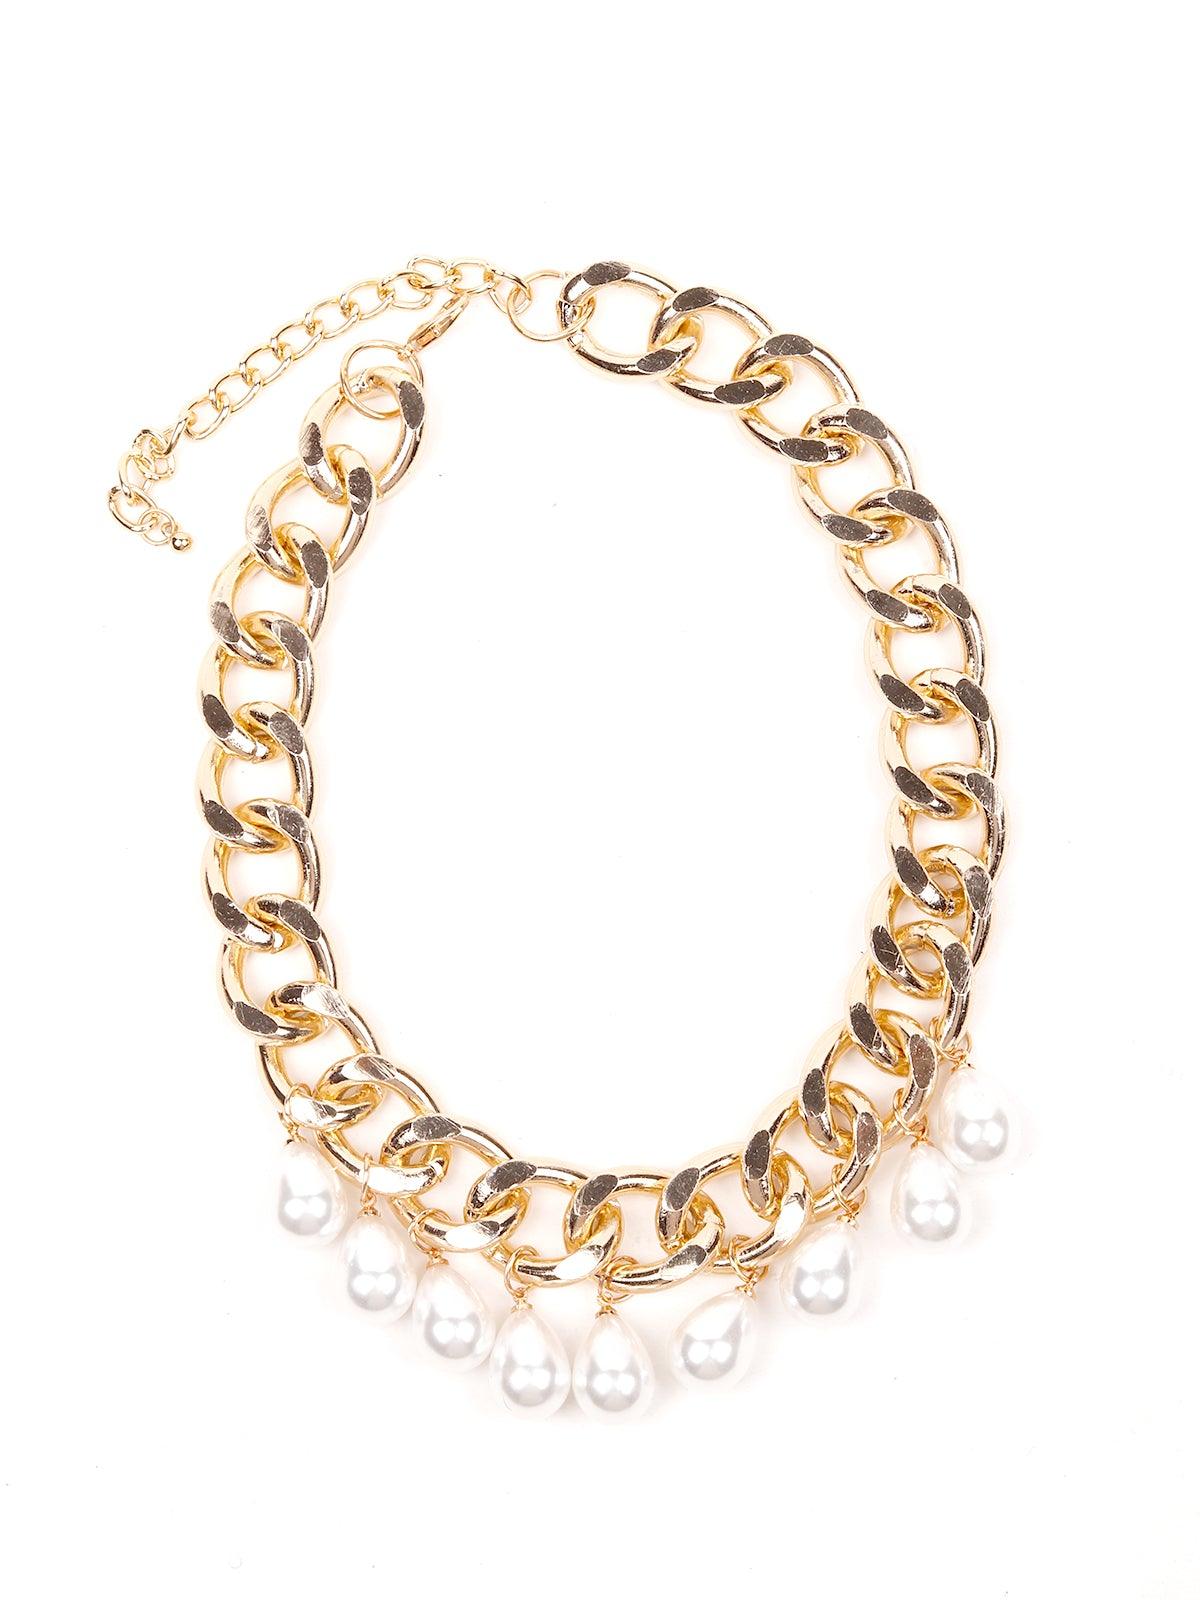 Women's Stunning Interlinked Gold Chain With White Stones Embedded. - Odette